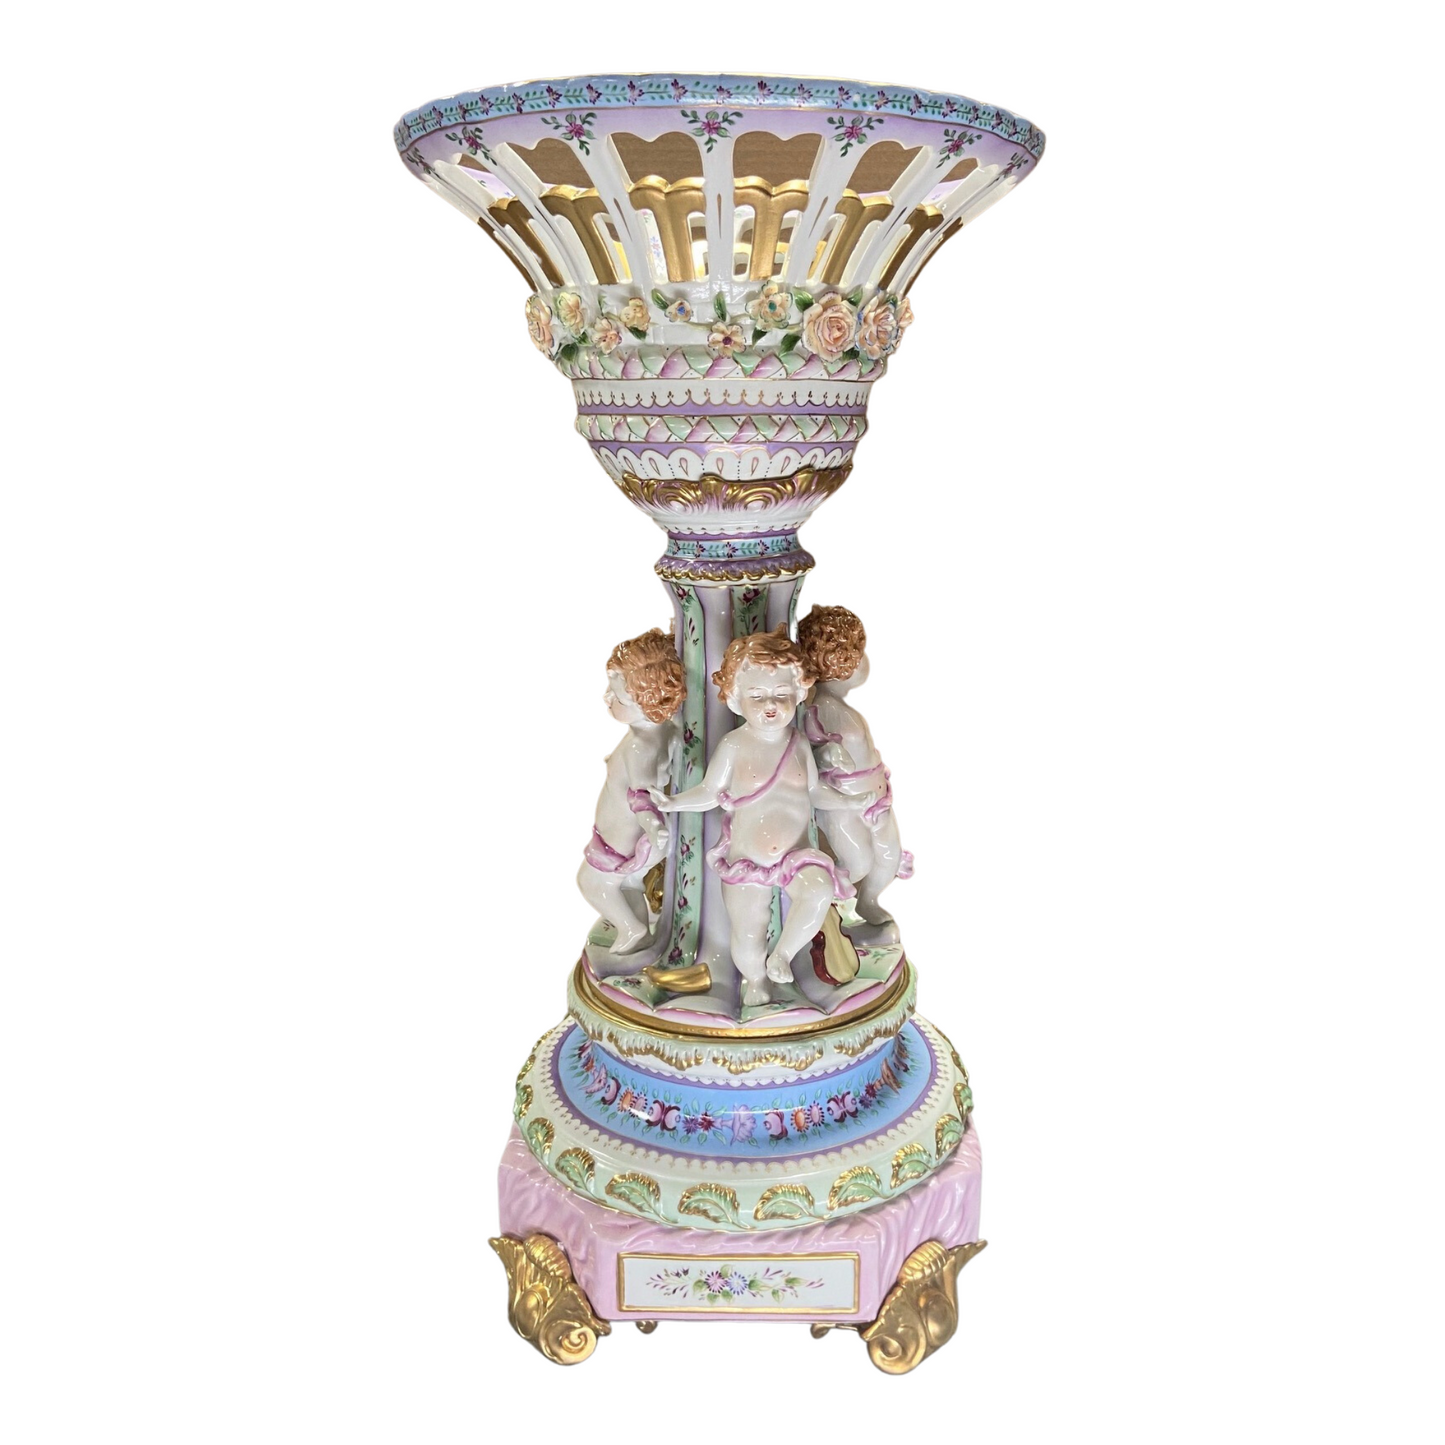 Rococo Style Porcelain Bowl With Cherubs